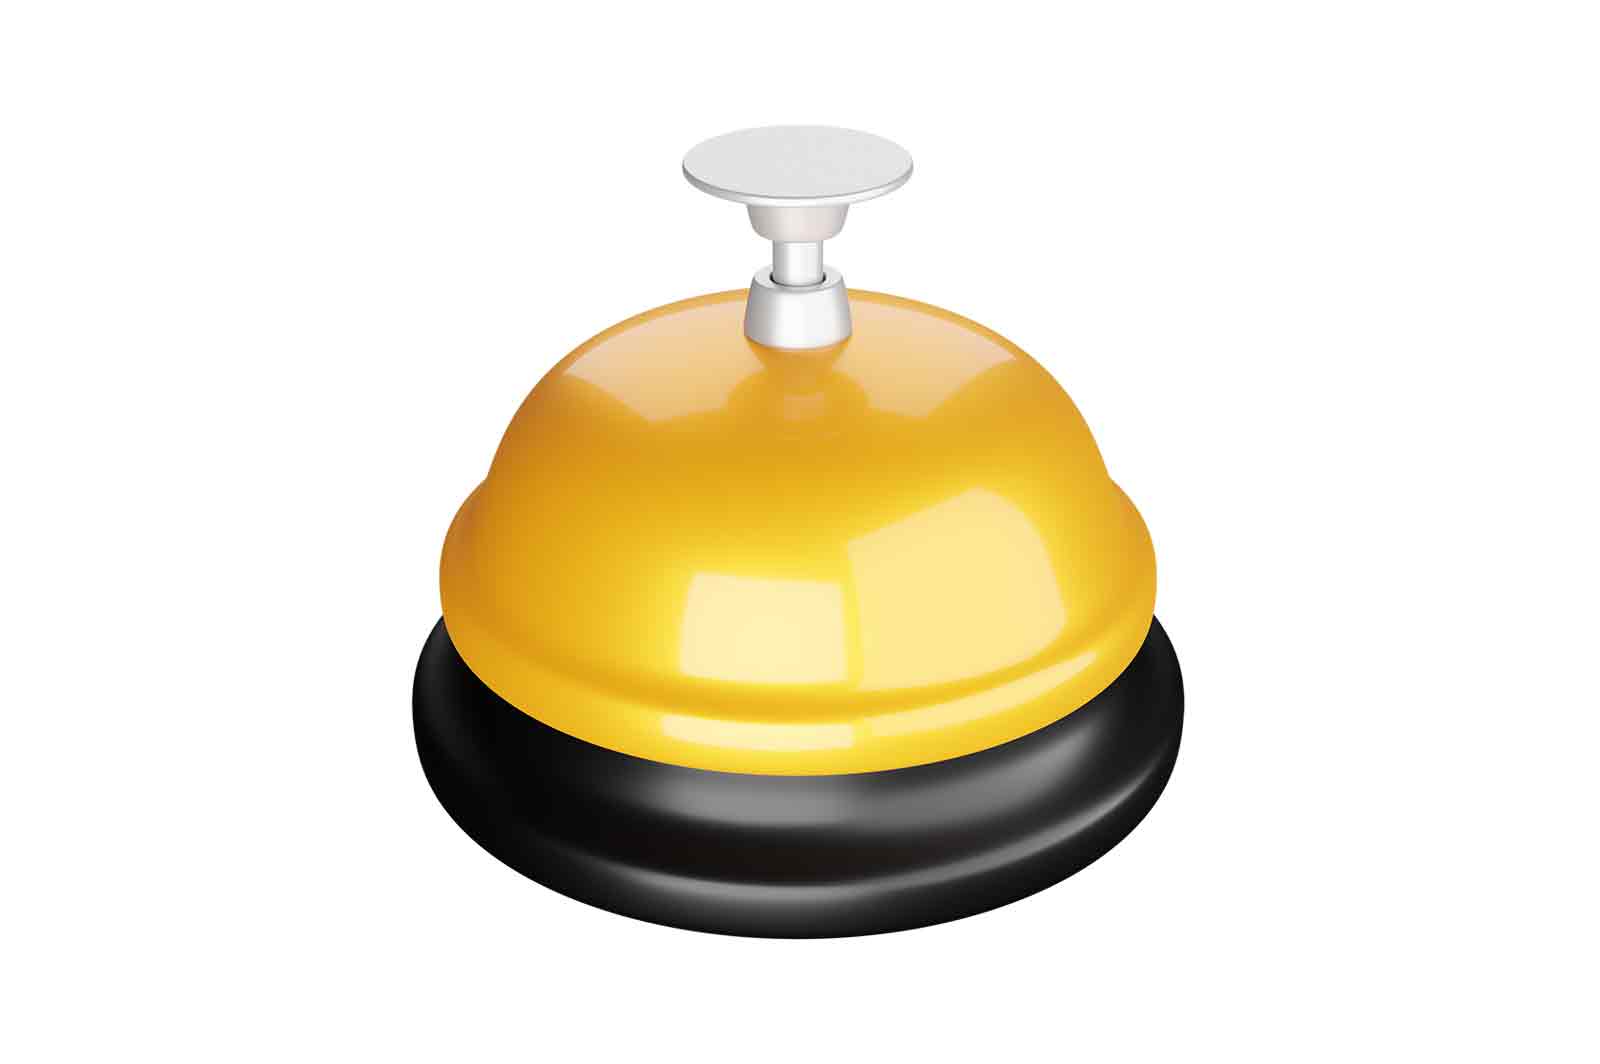 Reception bell for concierge support or alarm 3d rendered icon illustration. Service desk bell. Sound signal equipment